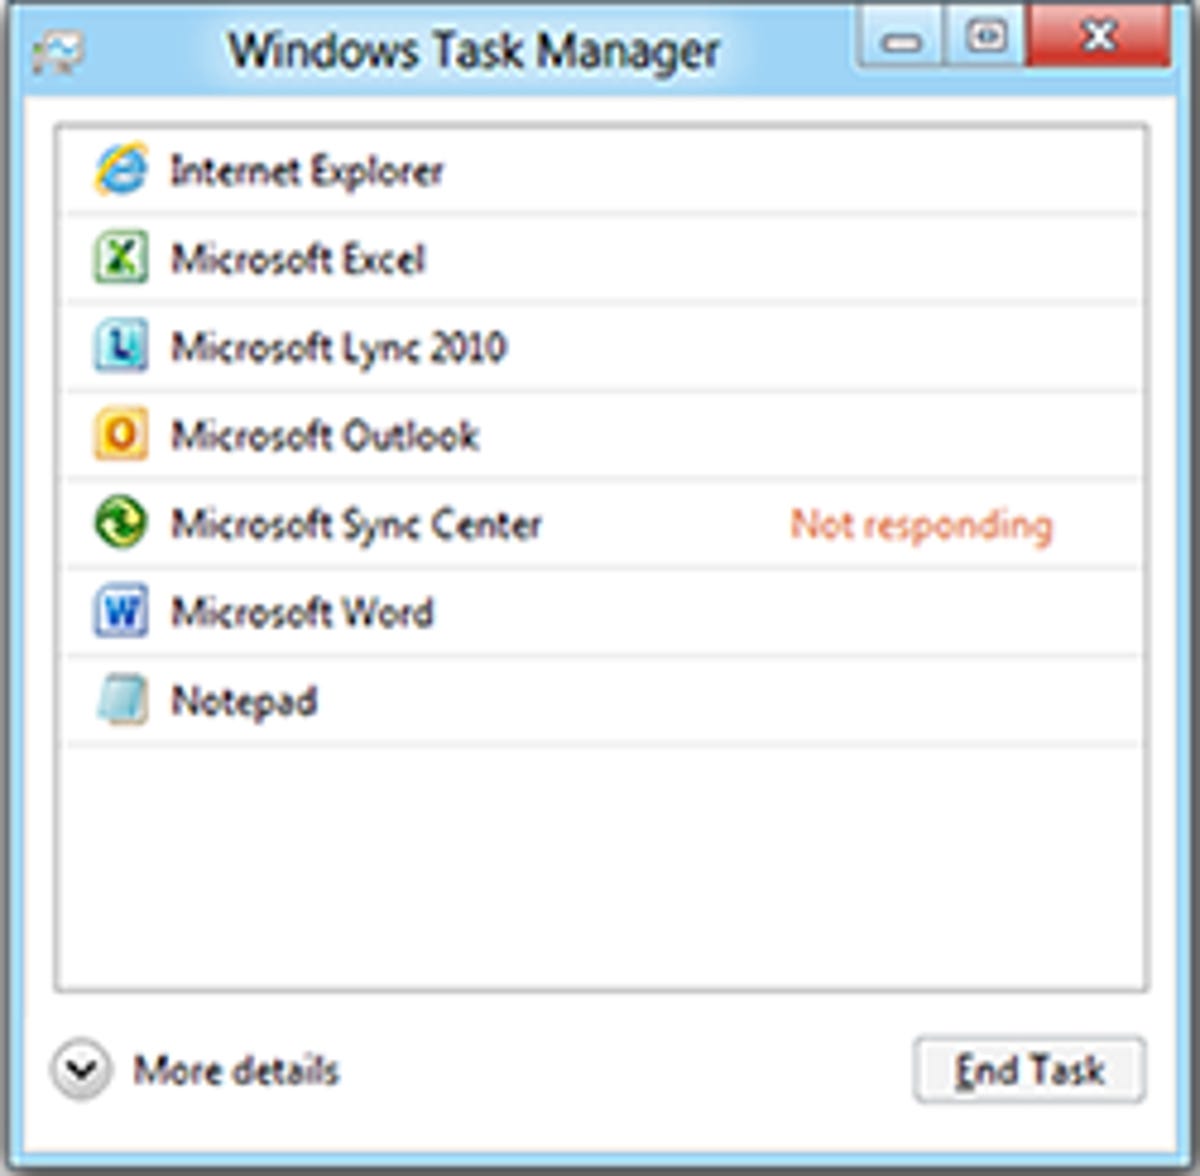 The new default view in Windows 8's Task Manager.